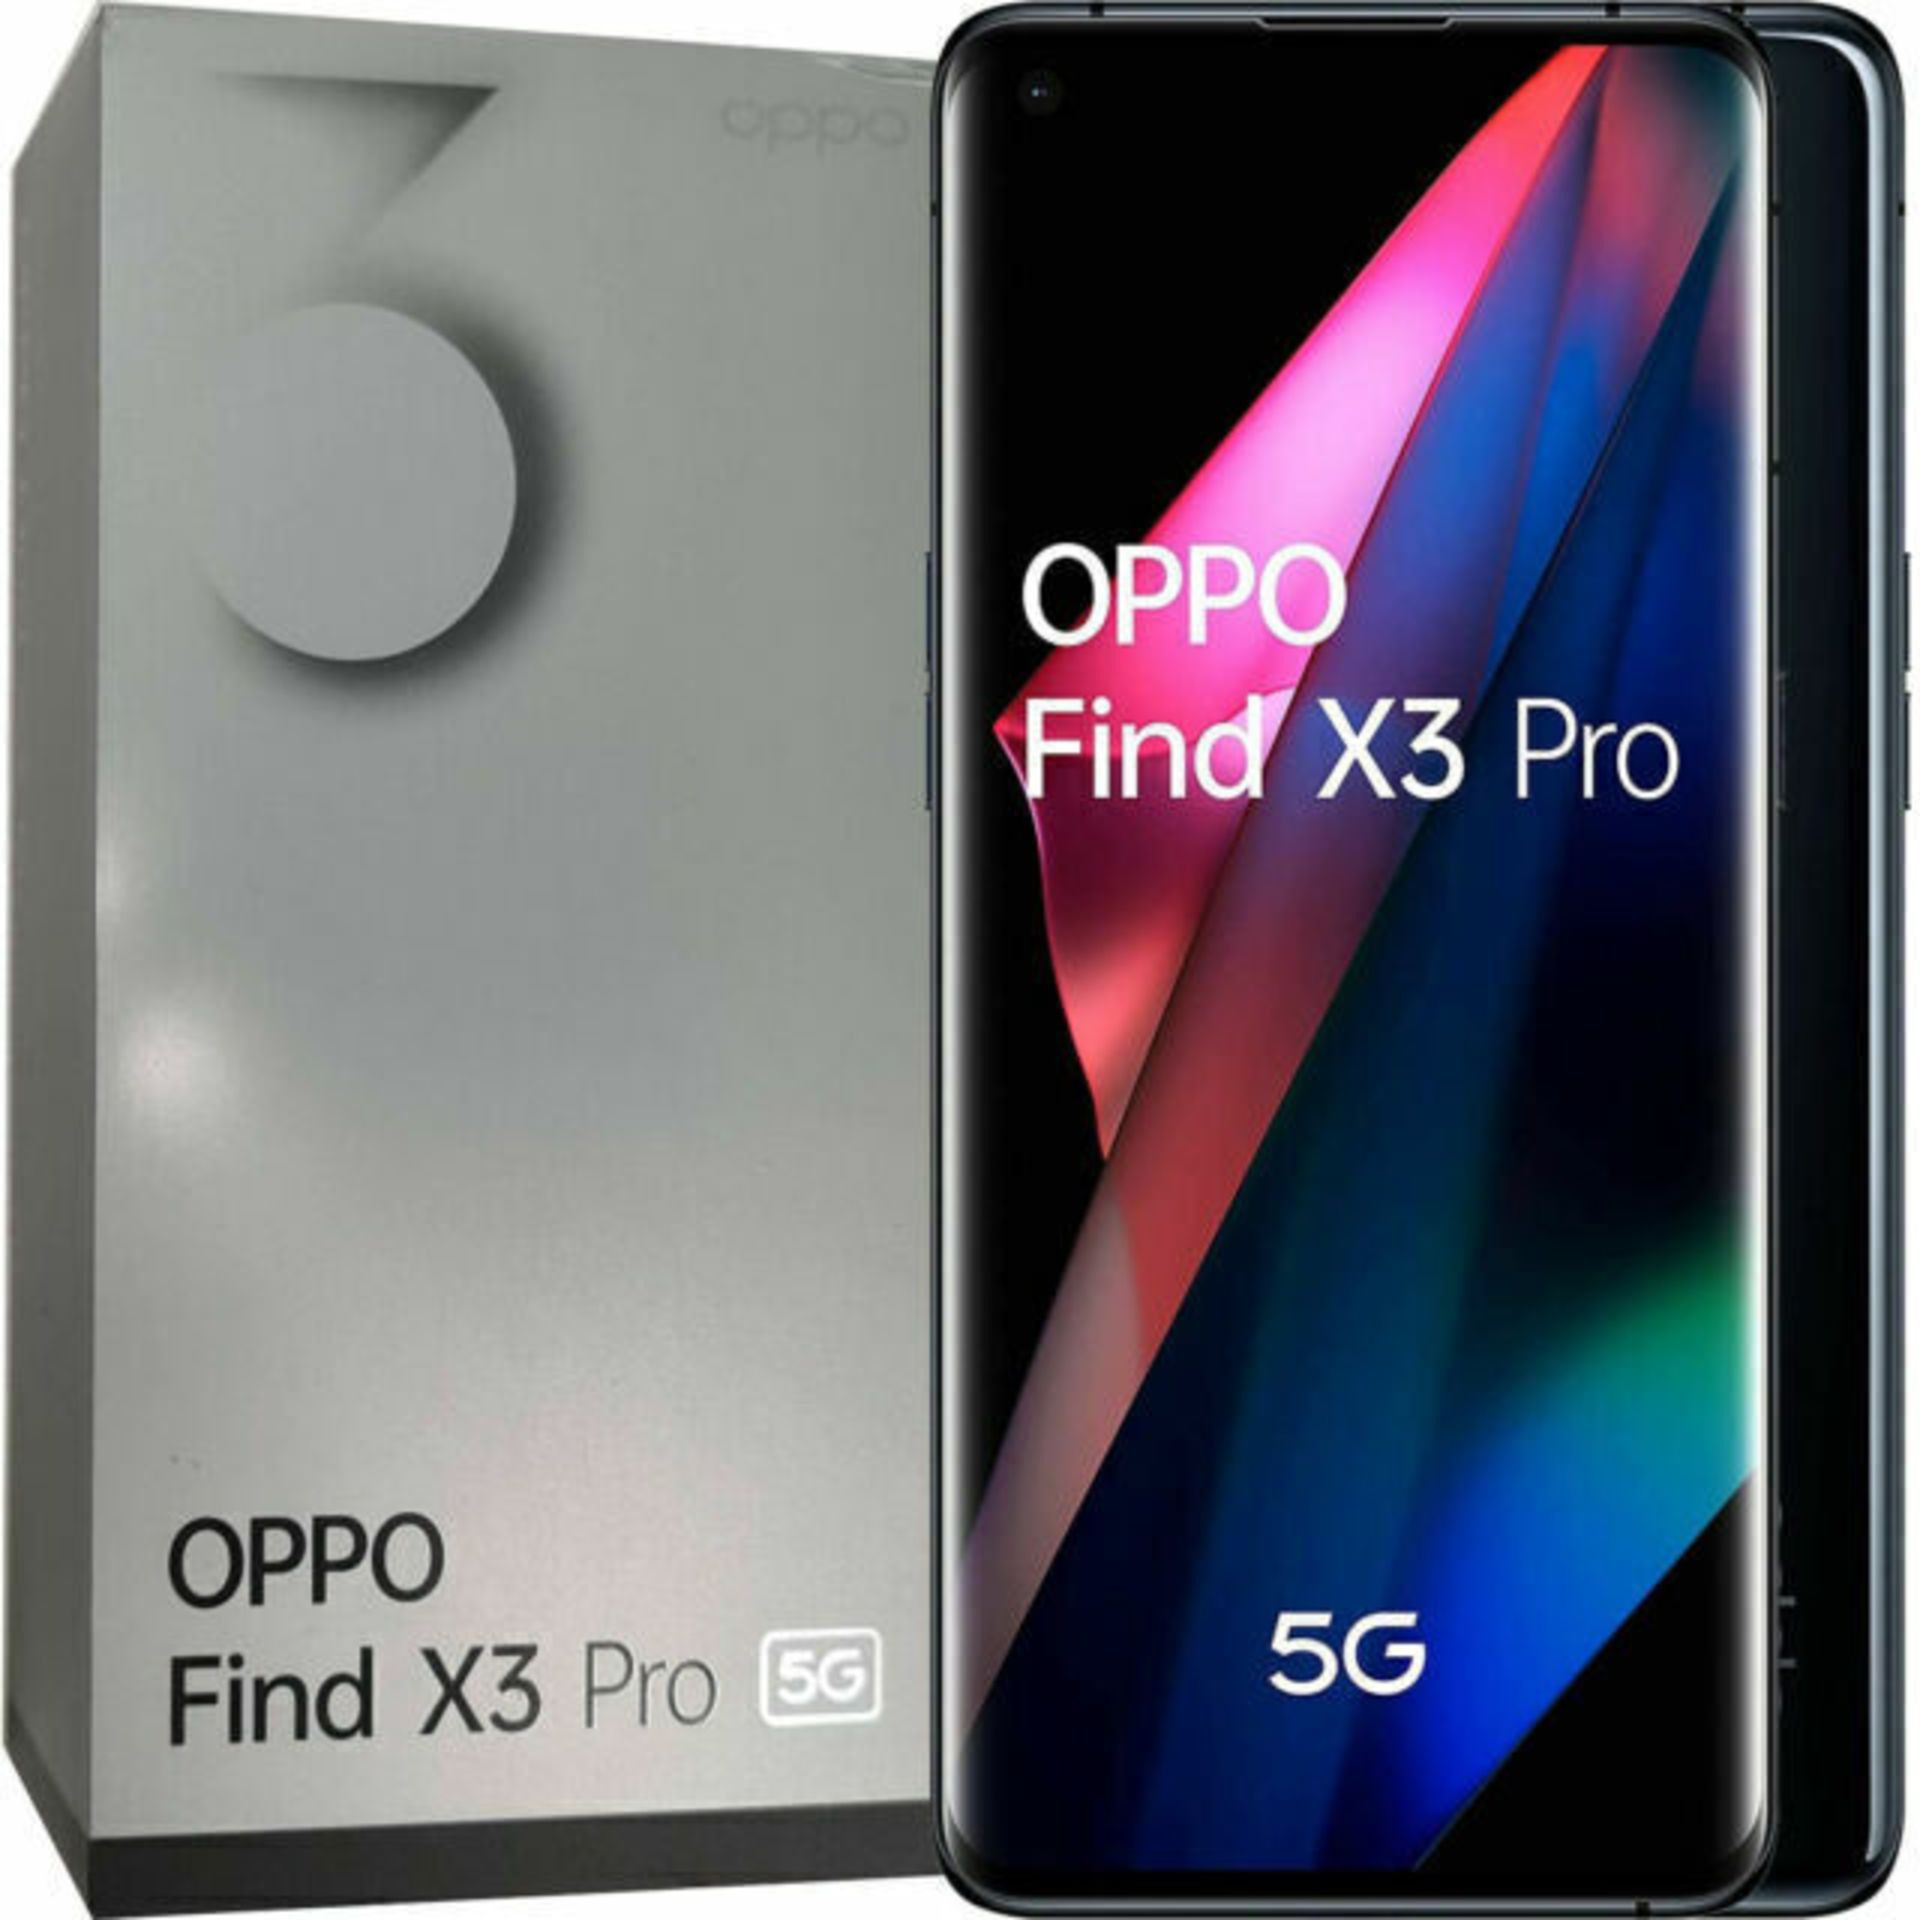 IMMACULATE OPPO FIND X3 PRO 256GB SILVER / CHROME UNLOCKED SMARTPHONE *NO VAT*